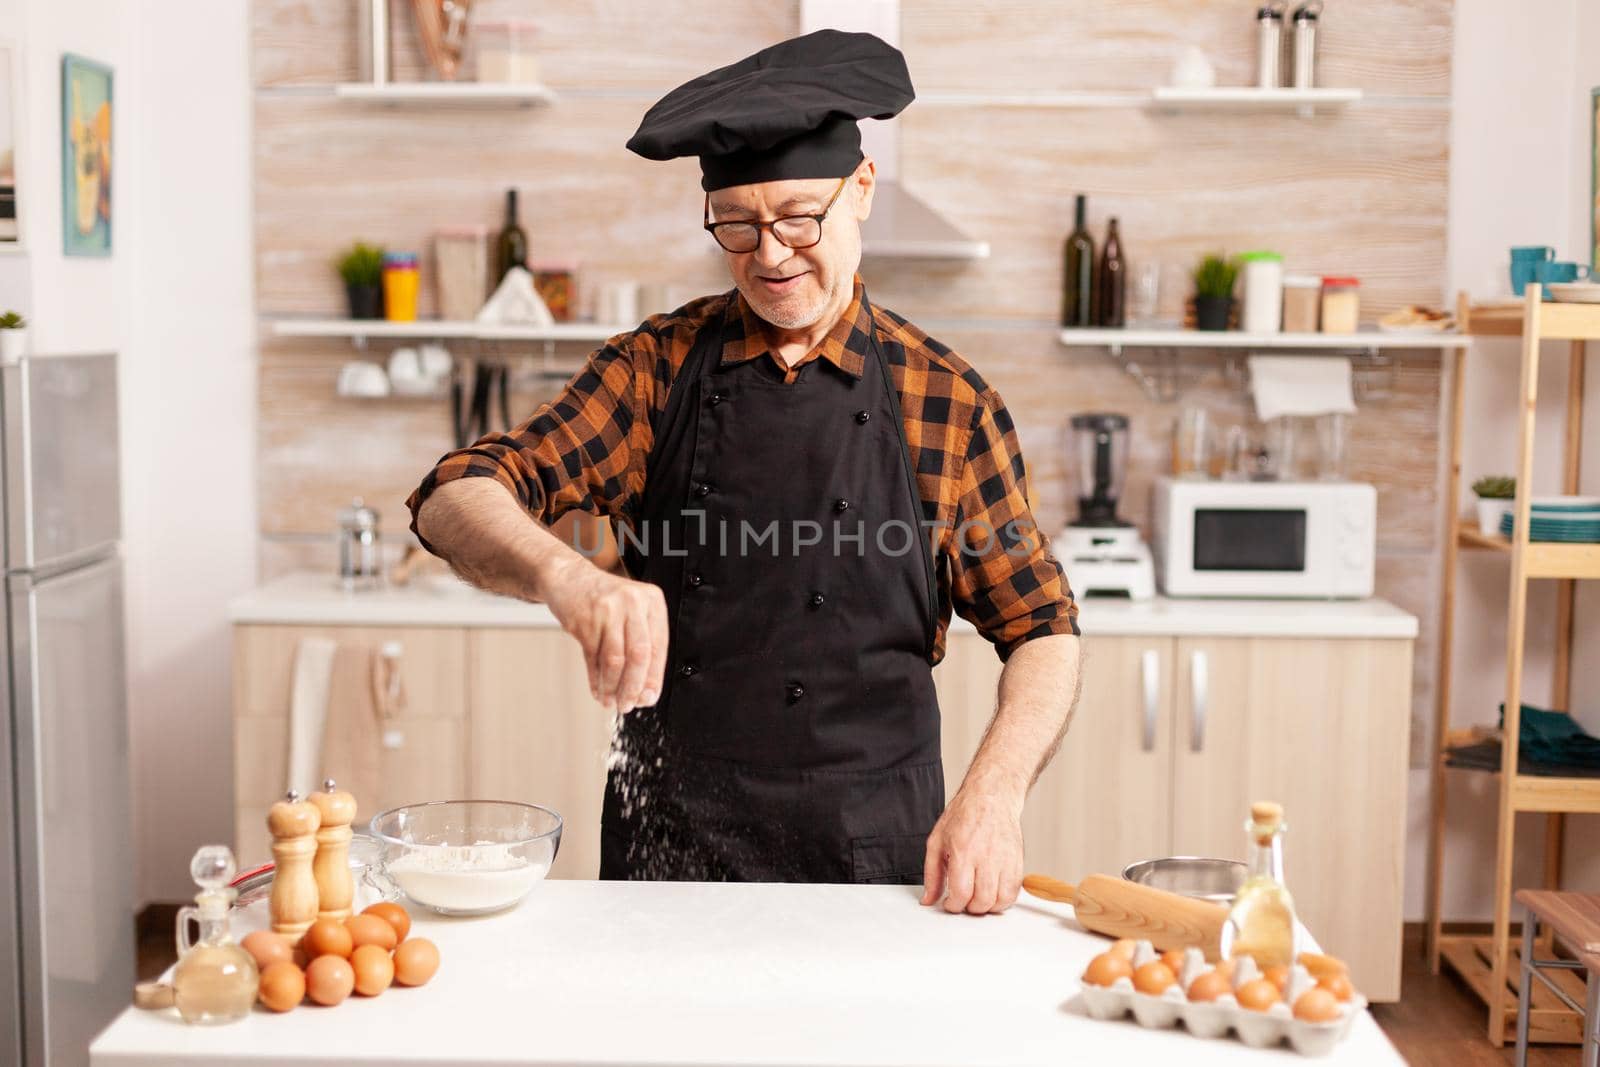 Senior chef preparing homemade bread sprinkling wheat flour on kitchen table. Retired senior chef with bonete and apron, in kitchen uniform sprinkling sieving sifting ingredients by hand.